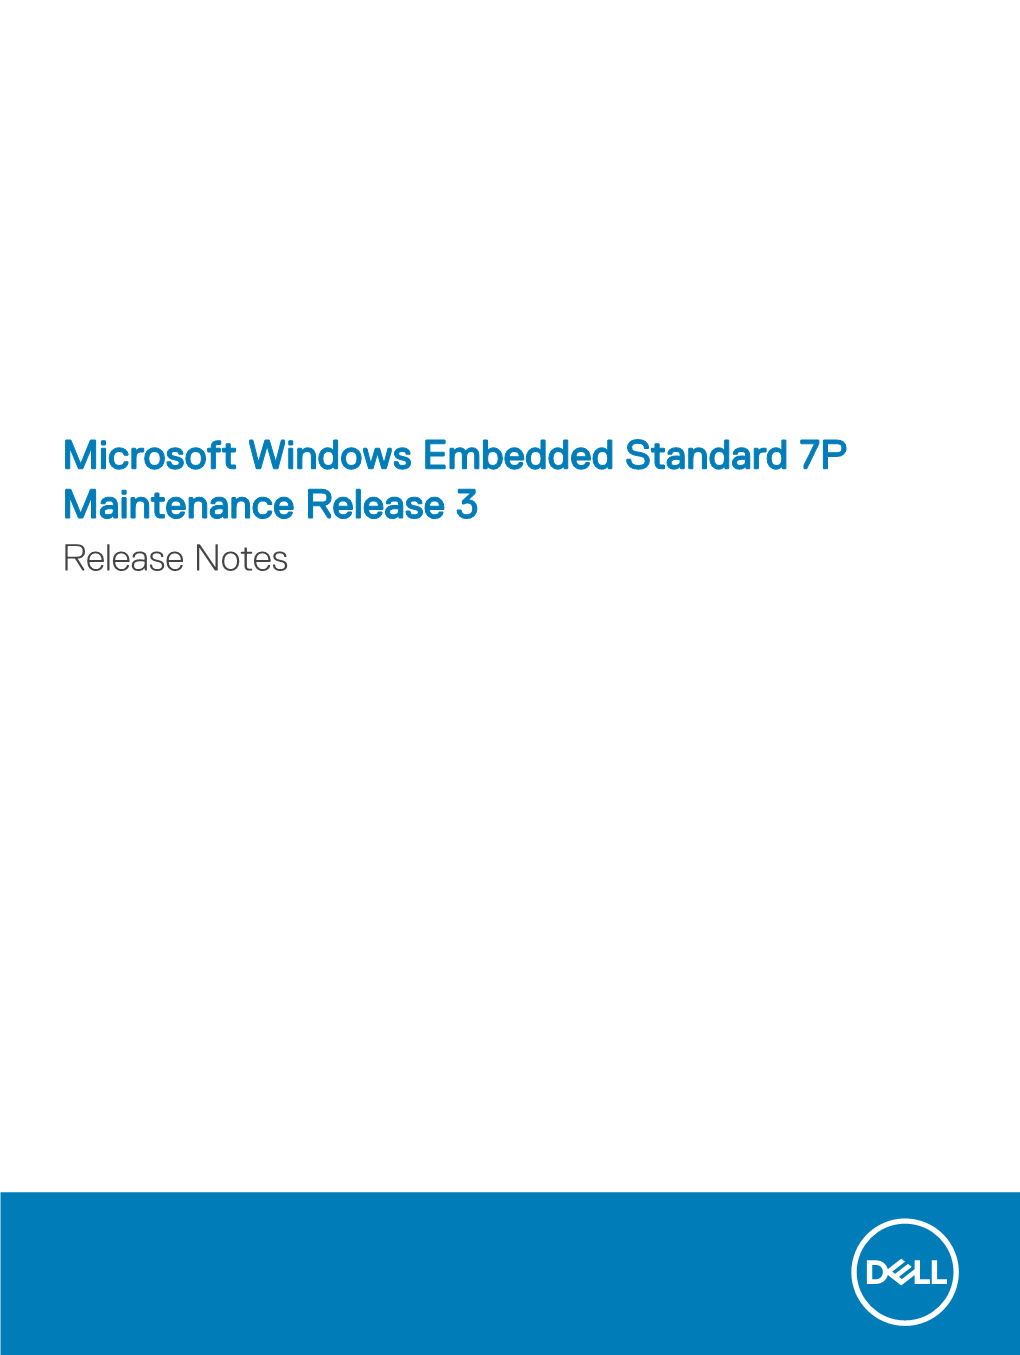 Microsoft Windows Embedded Standard 7P Maintenance Release 3 Release Notes Notes, Cautions, and Warnings